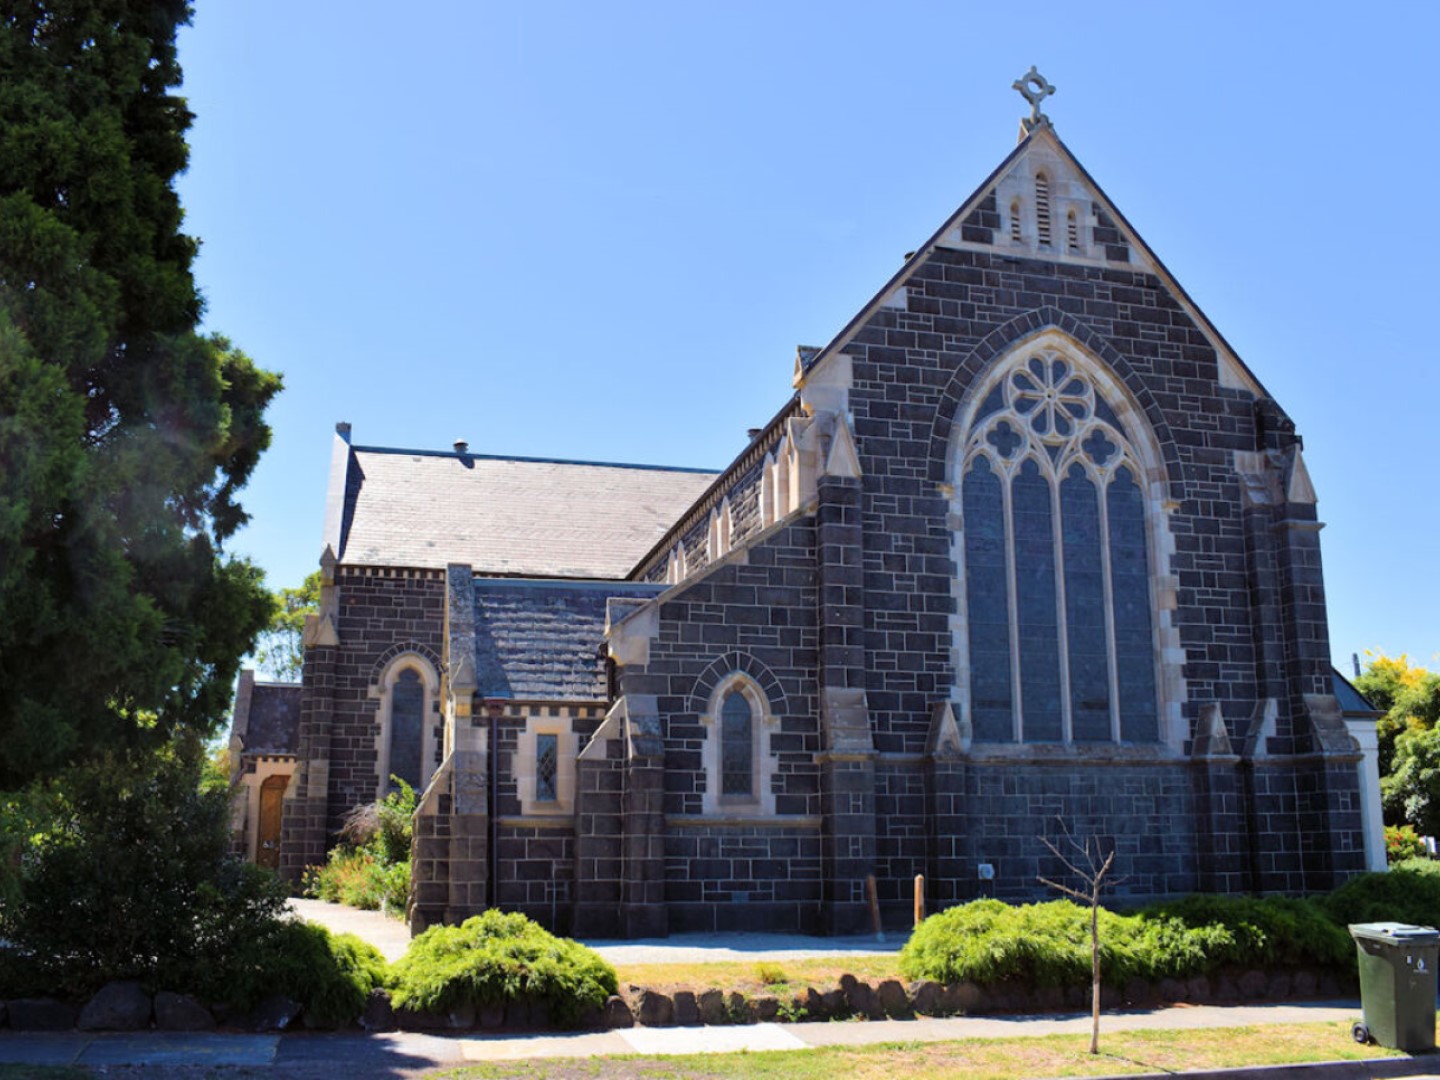 A bluestone church with a large arched window.